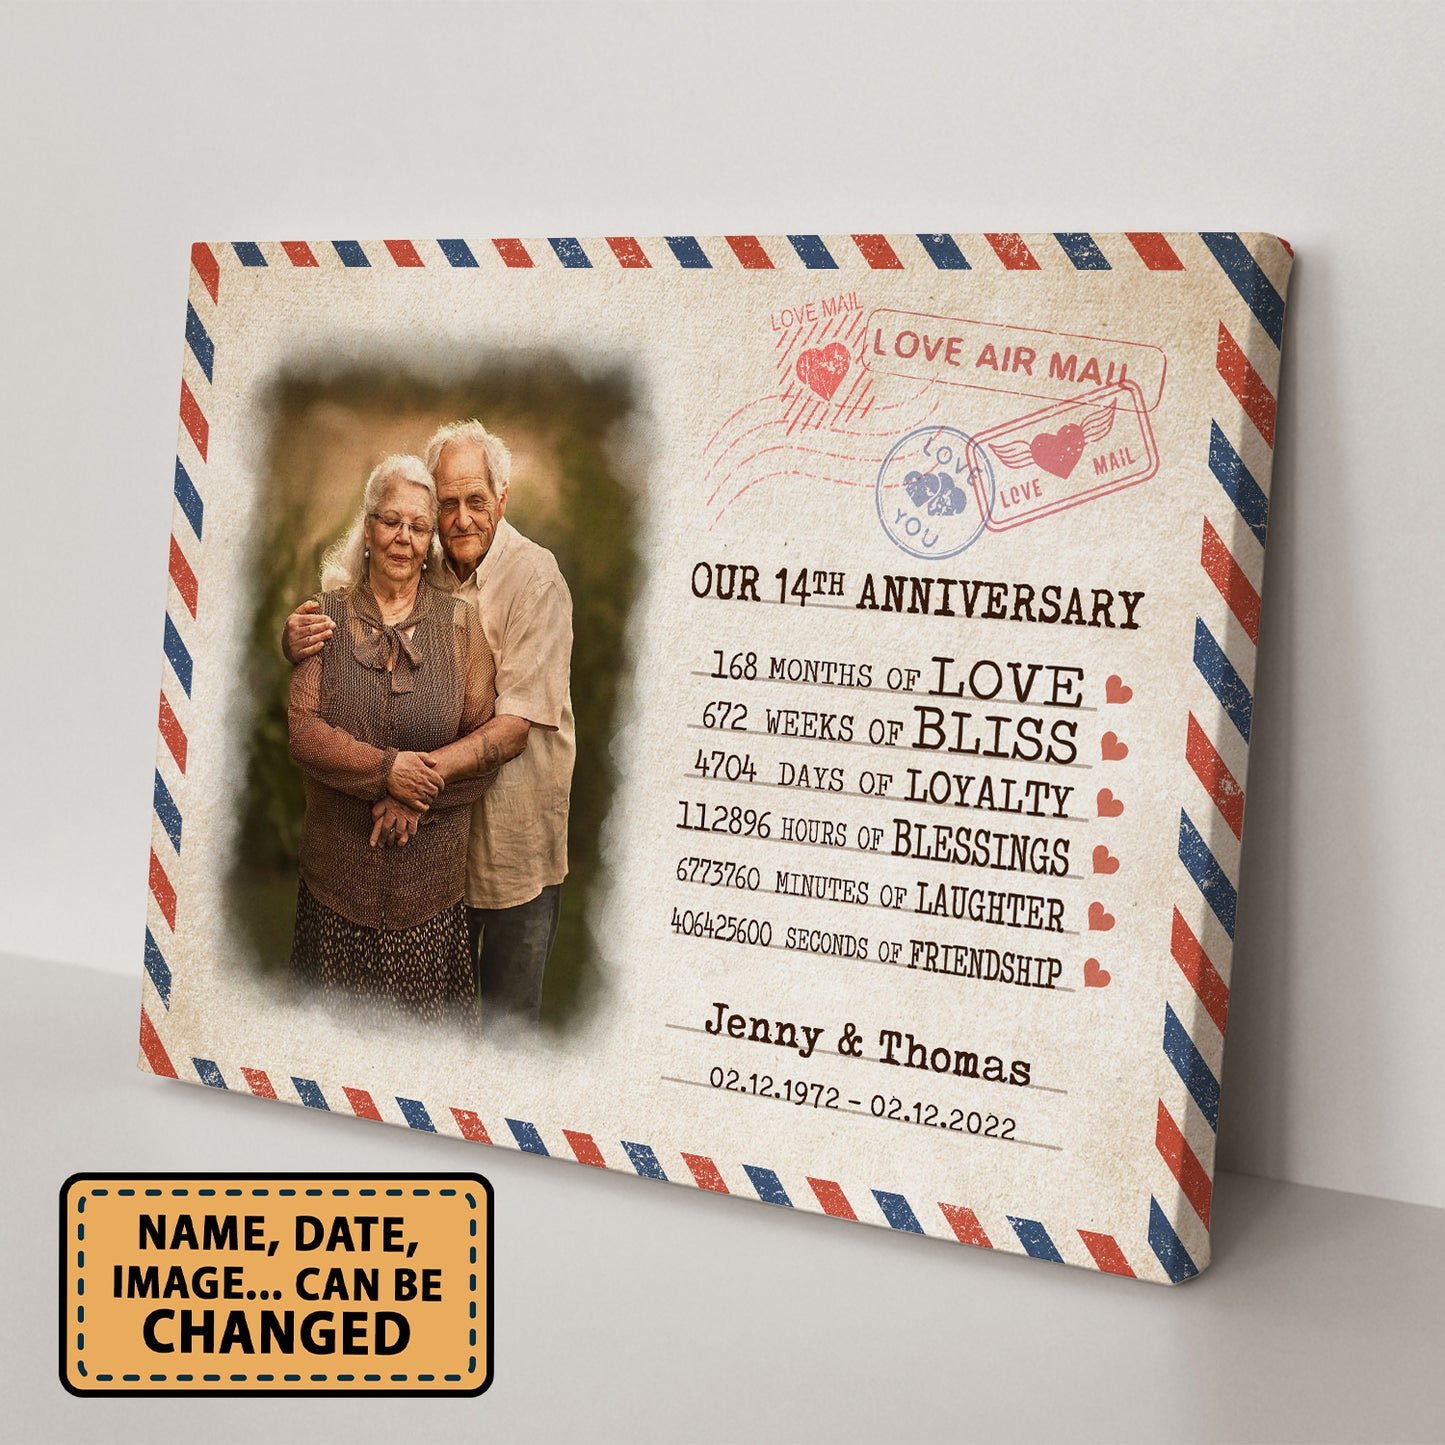 Our 14th Anniversary Letter Valentine Gift Personalized Canvas